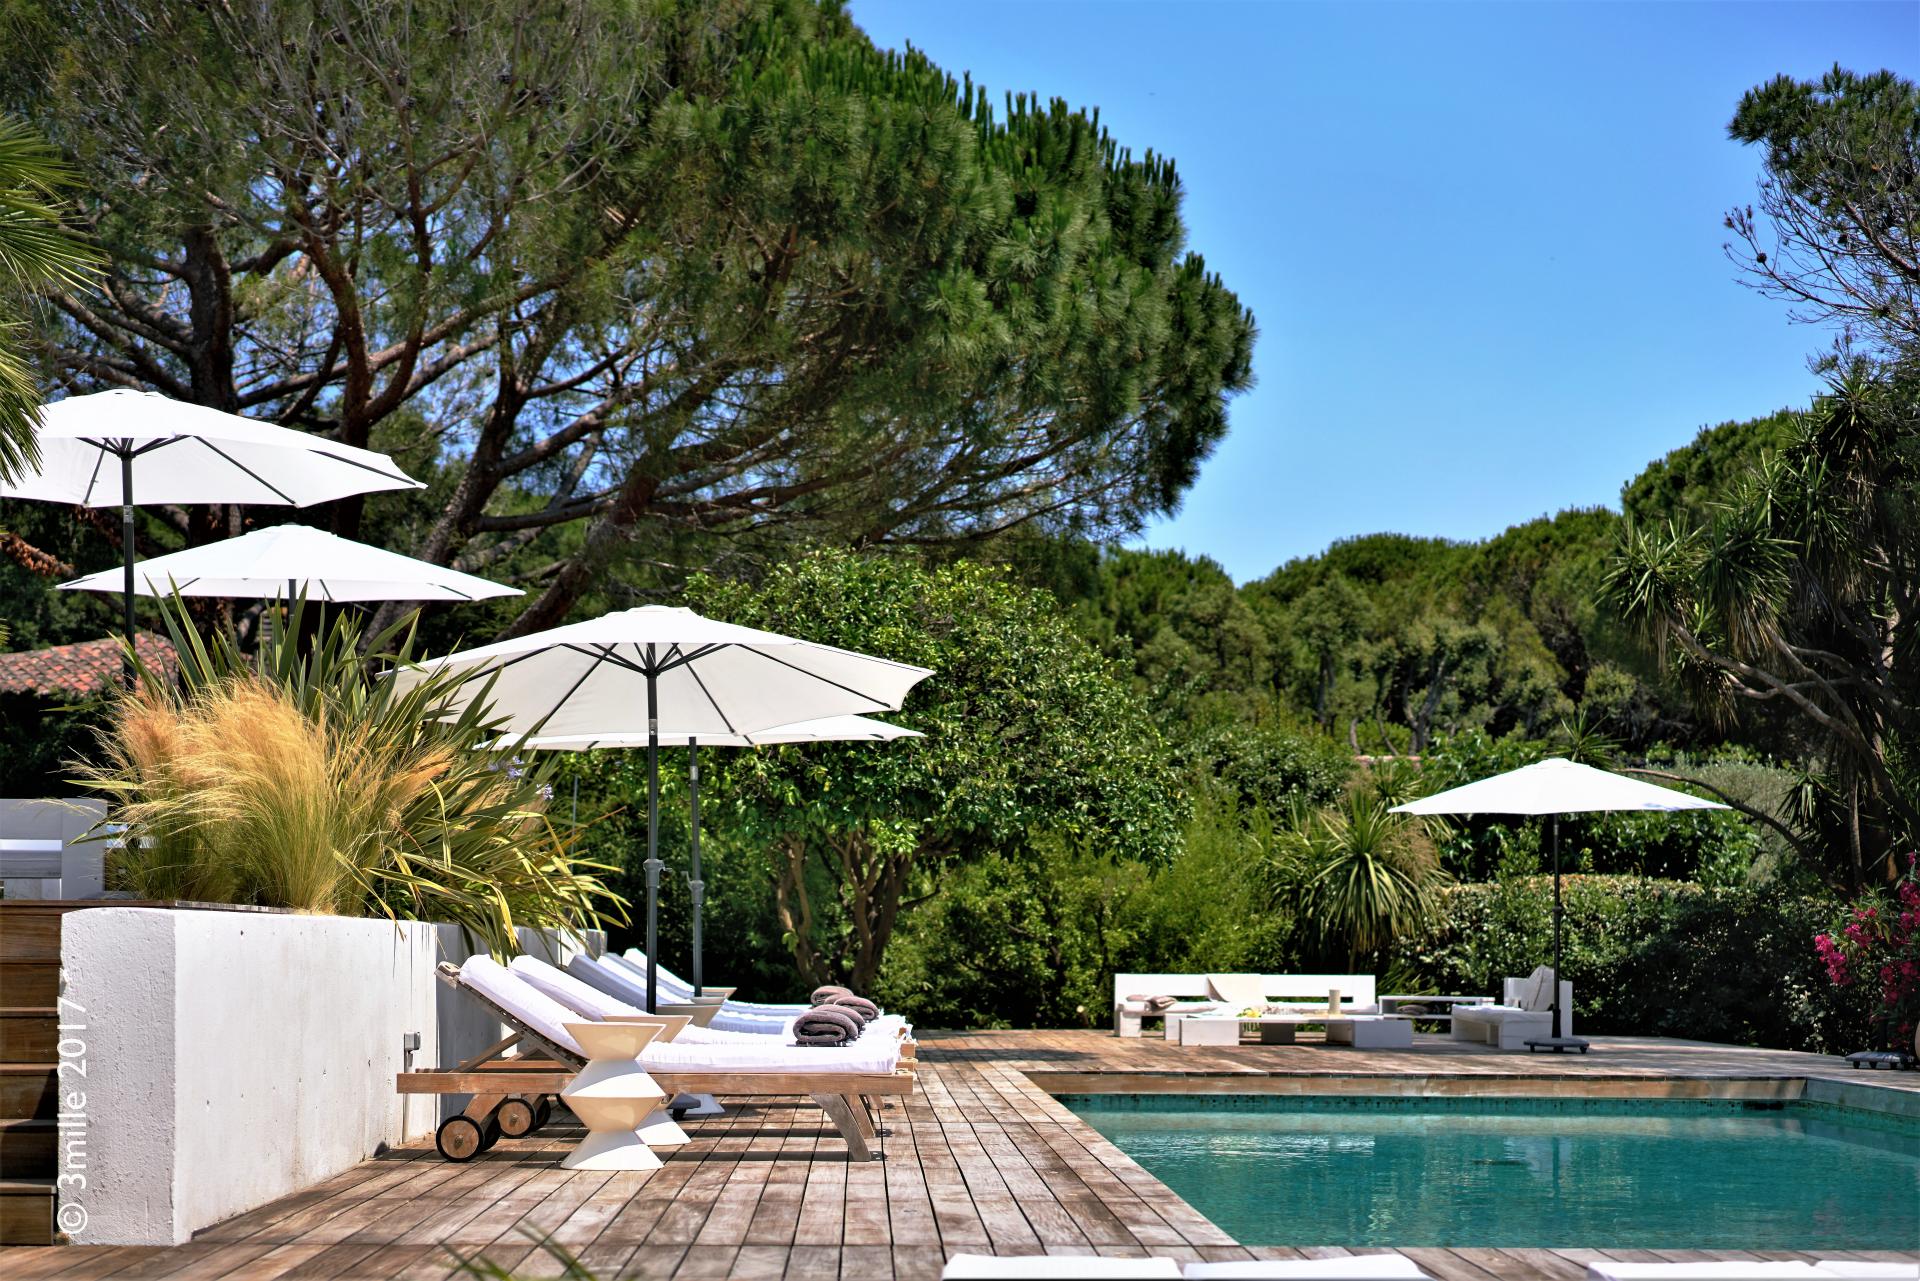 A  SWIMMING POOL IN A VILLA TO RENT IN THE DOMAIN DES PARCS